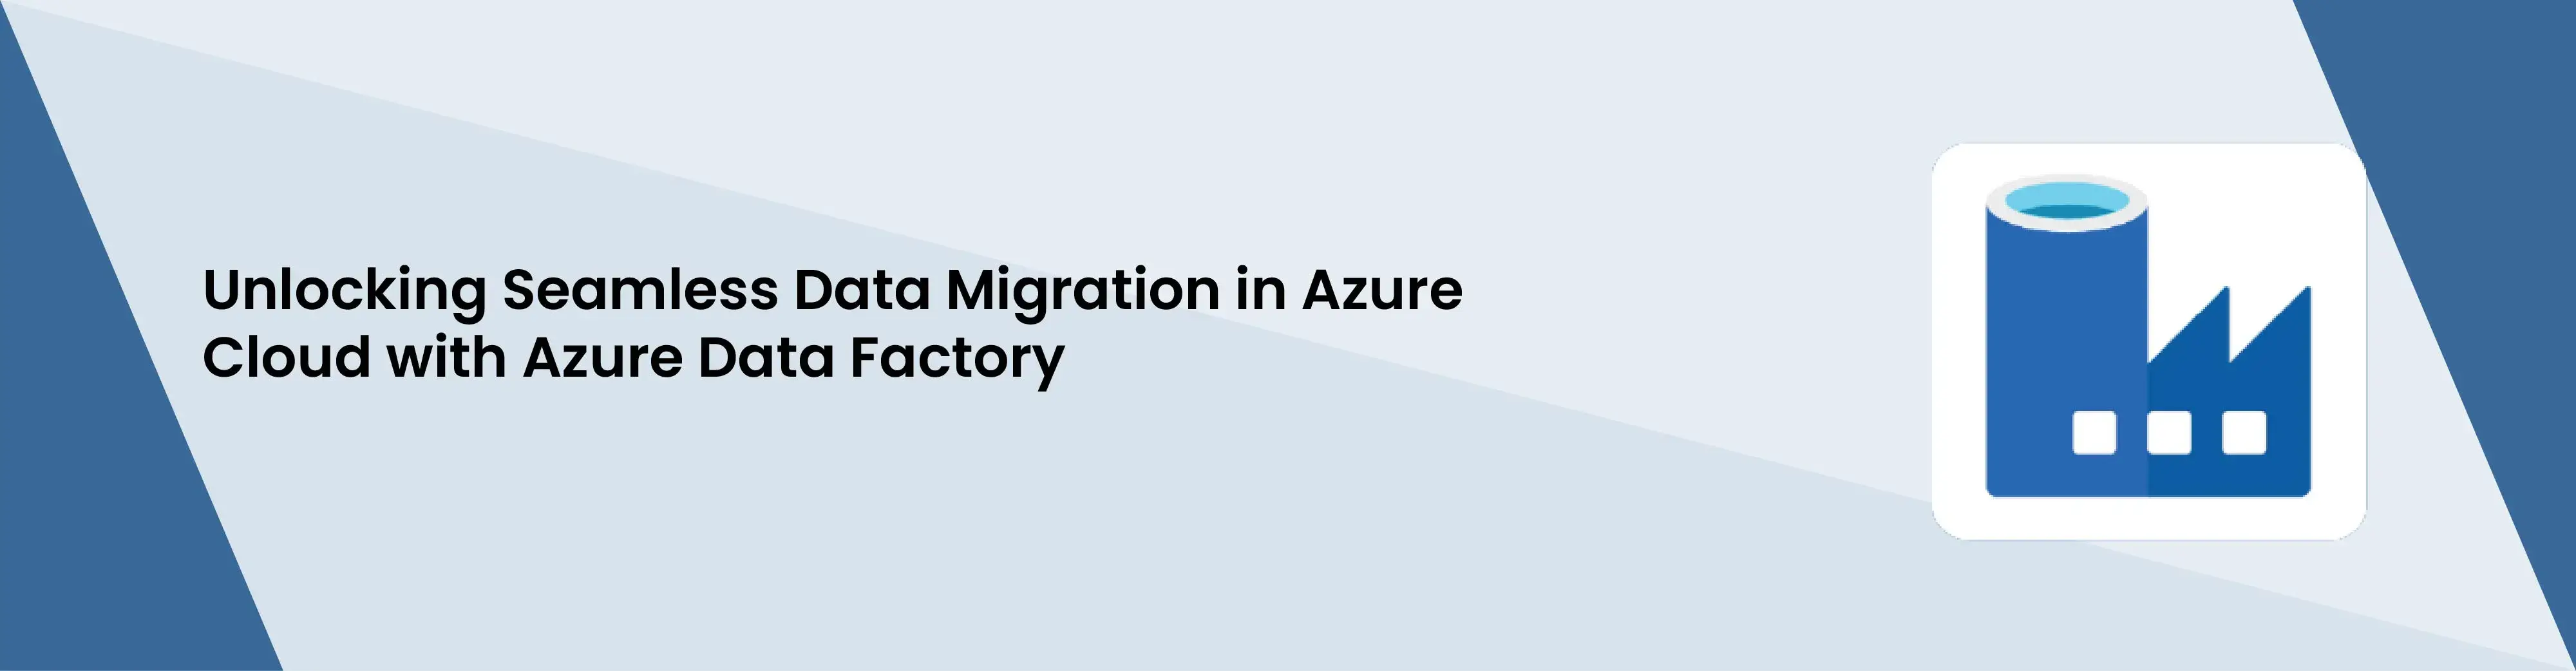 Unlocking Seamless Data Migration in Azure Cloud with Azure Data Factory